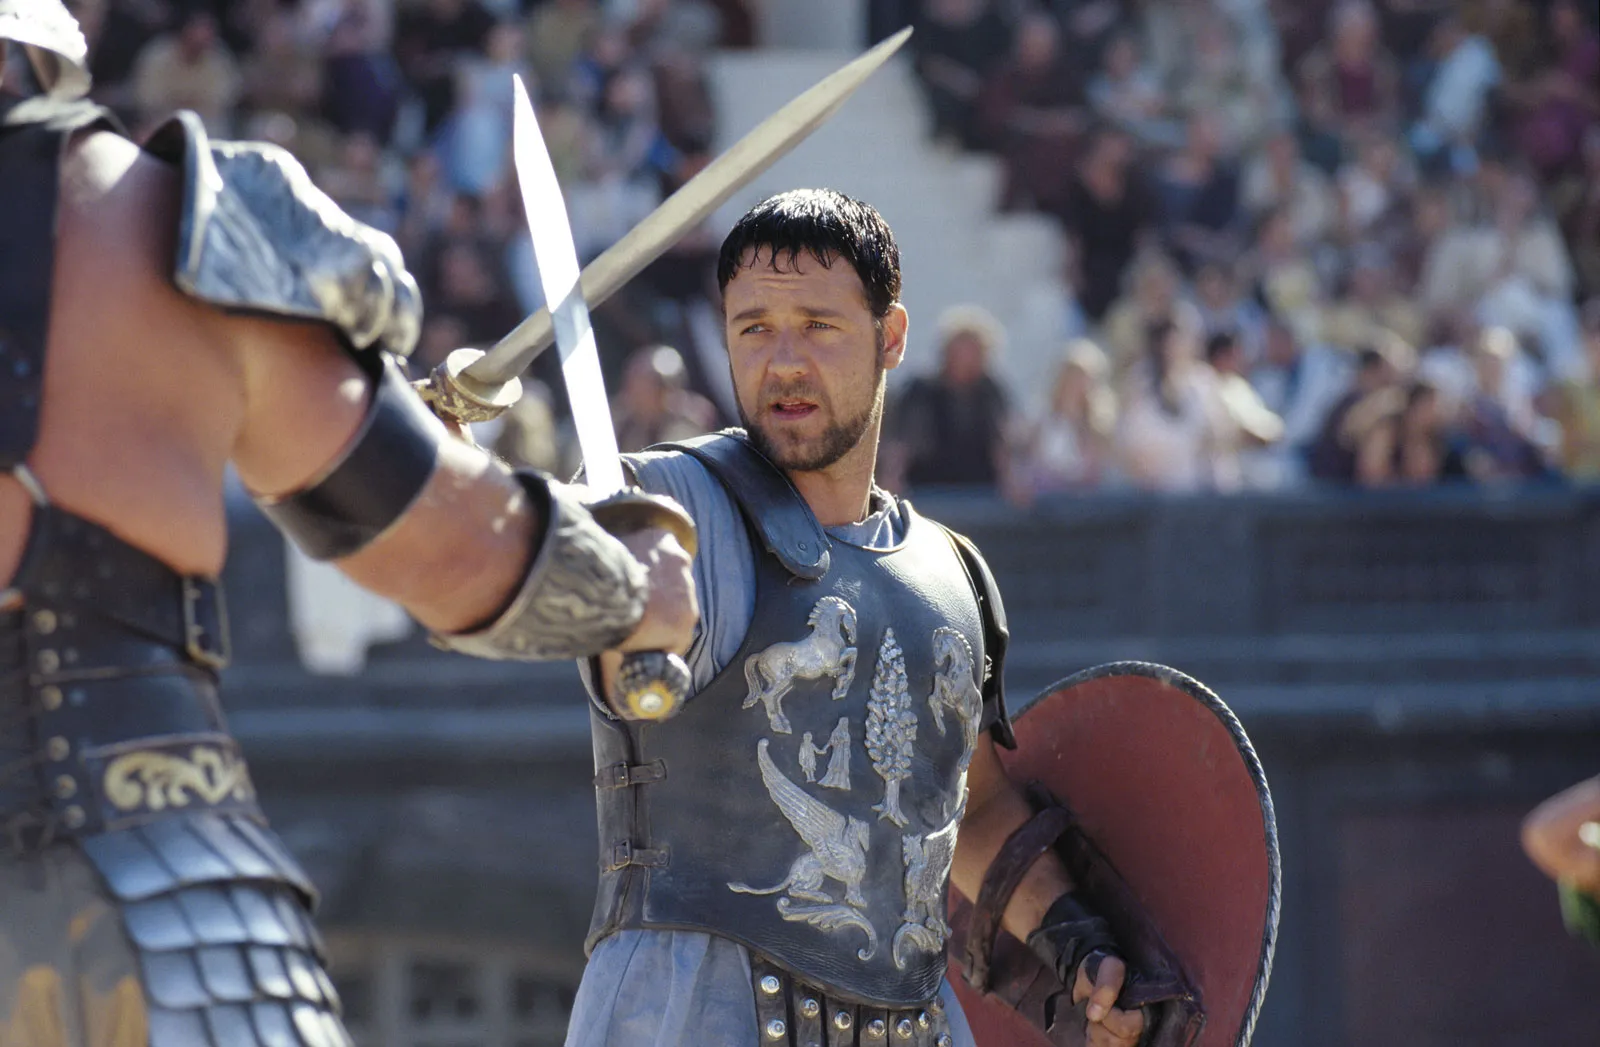 Gladiator 2 Release Dates, Casts, Everything We Know